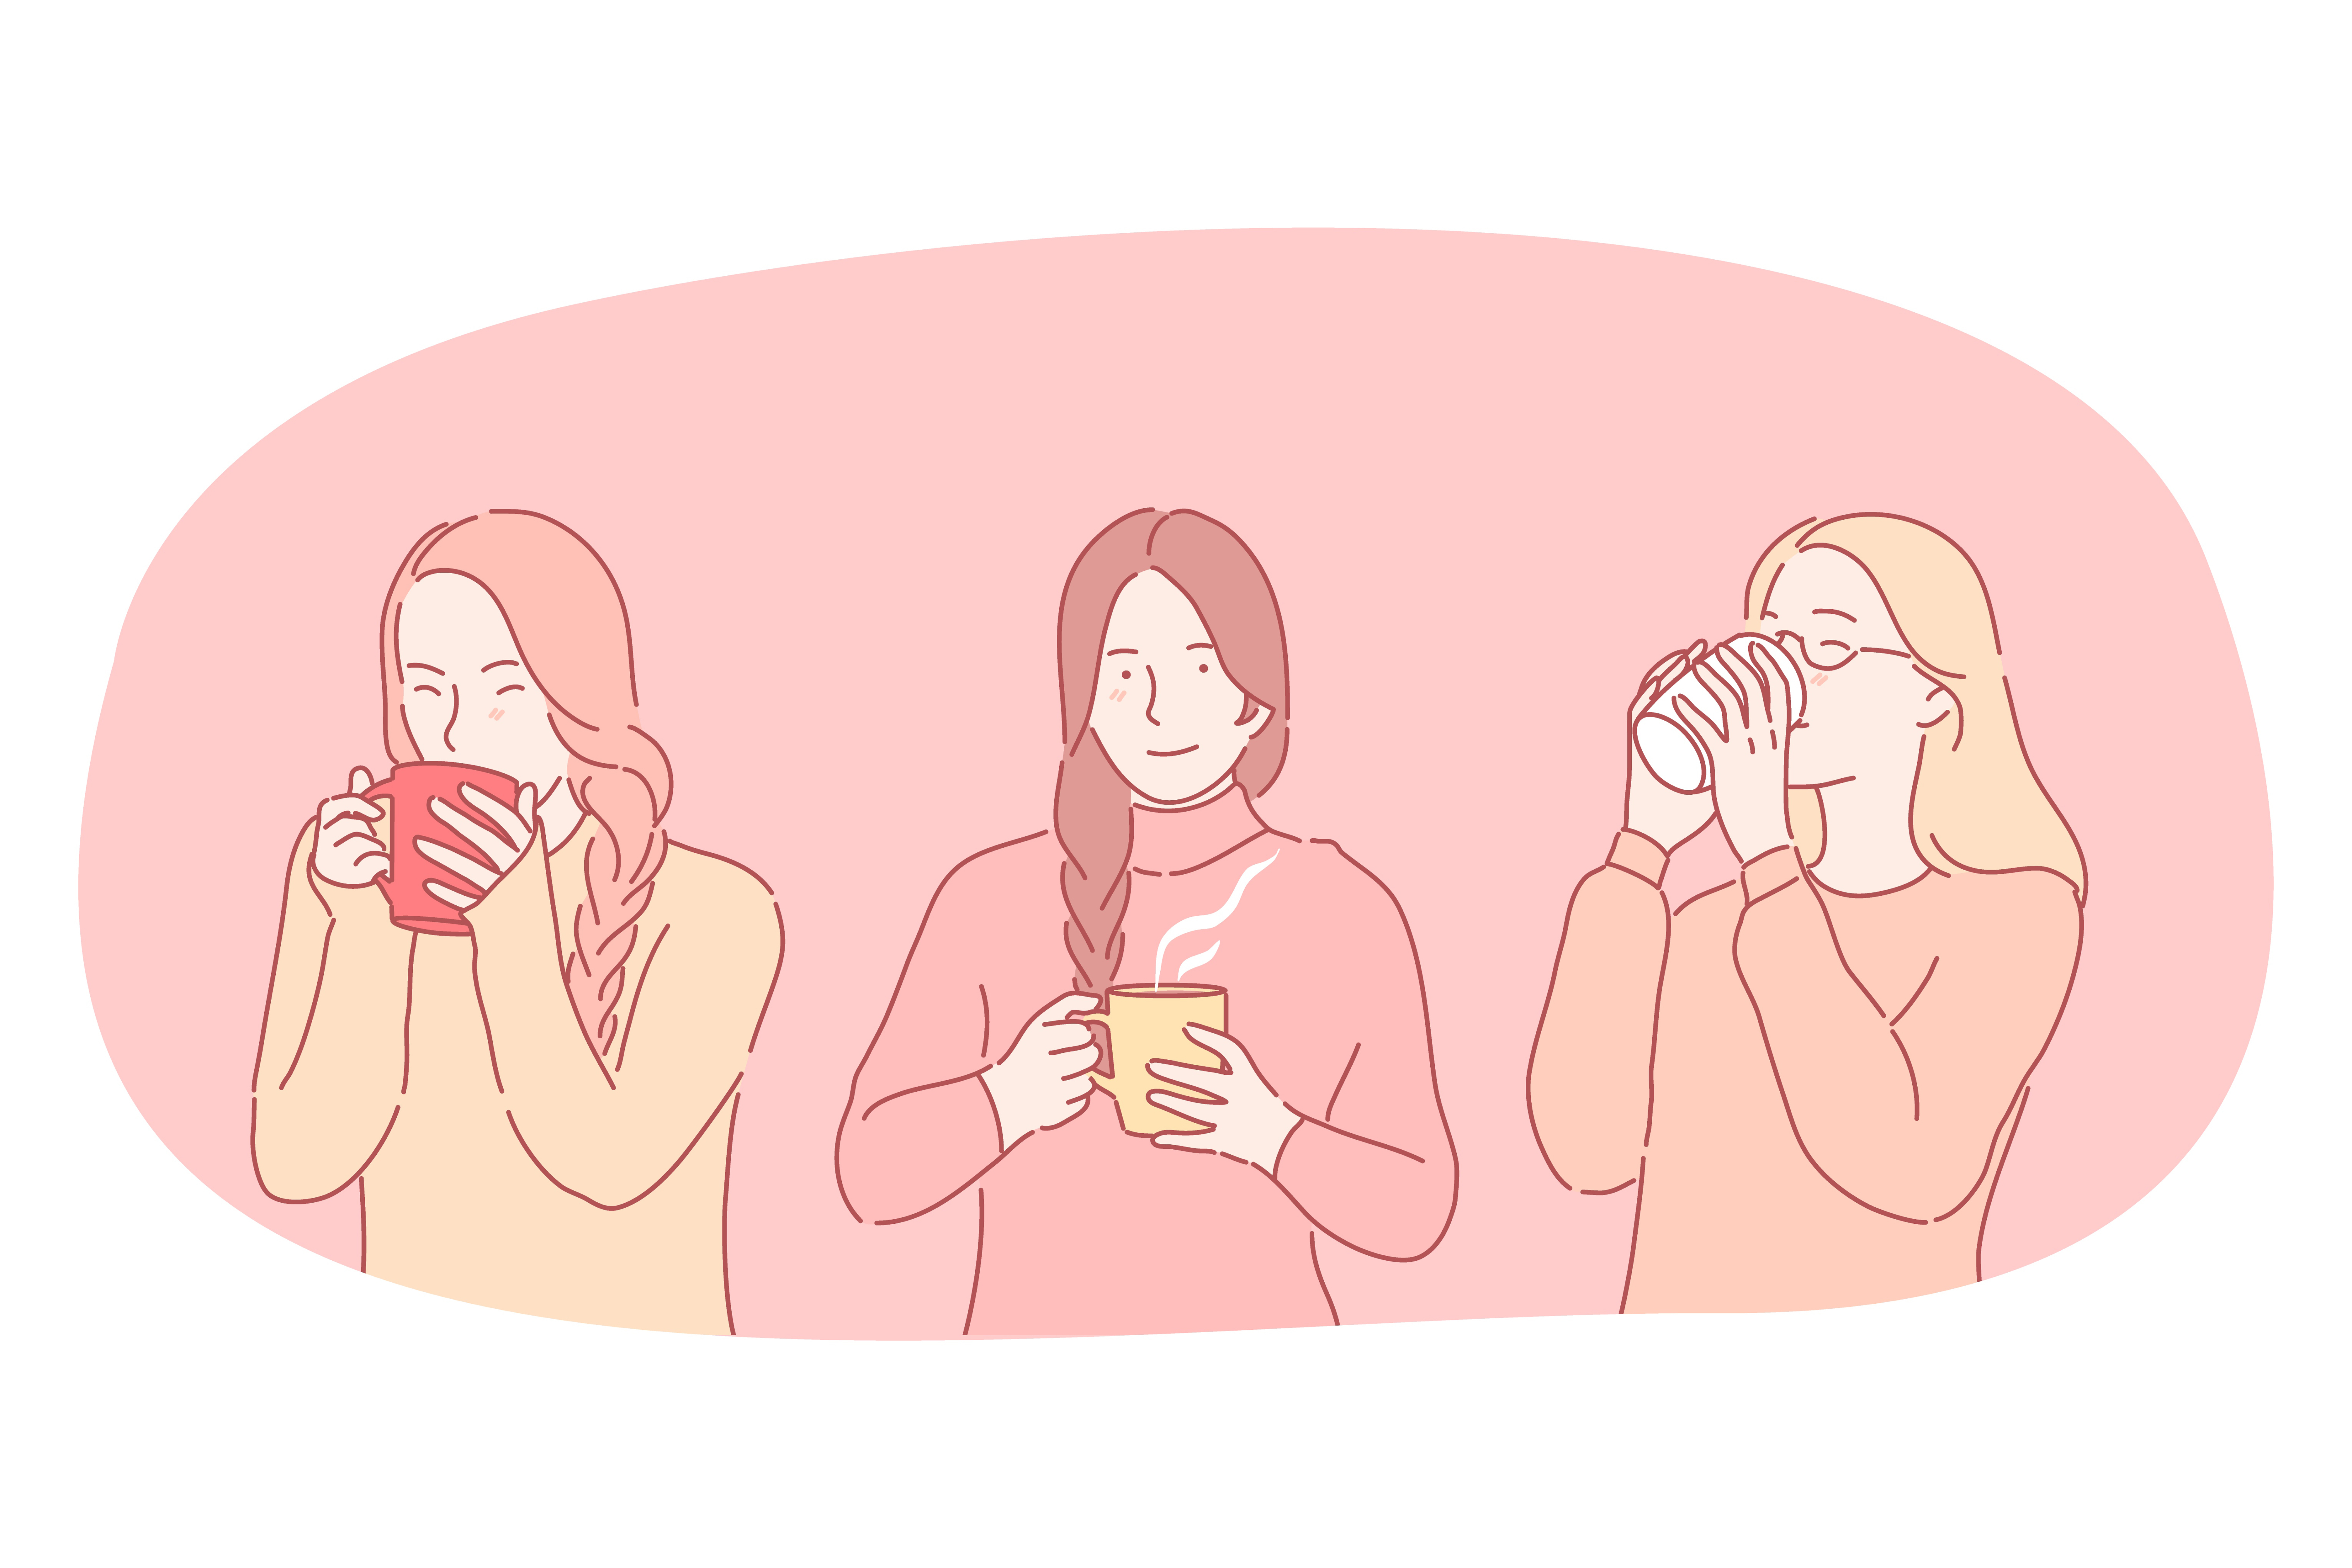 Hot drinks during cold seasons concept. Young positive women cartoon characters holding mugs and drinking hot drinks tea, coffee, cocoa for warming up during attune in winter vector illustration . Hot drinks during cold seasons concept